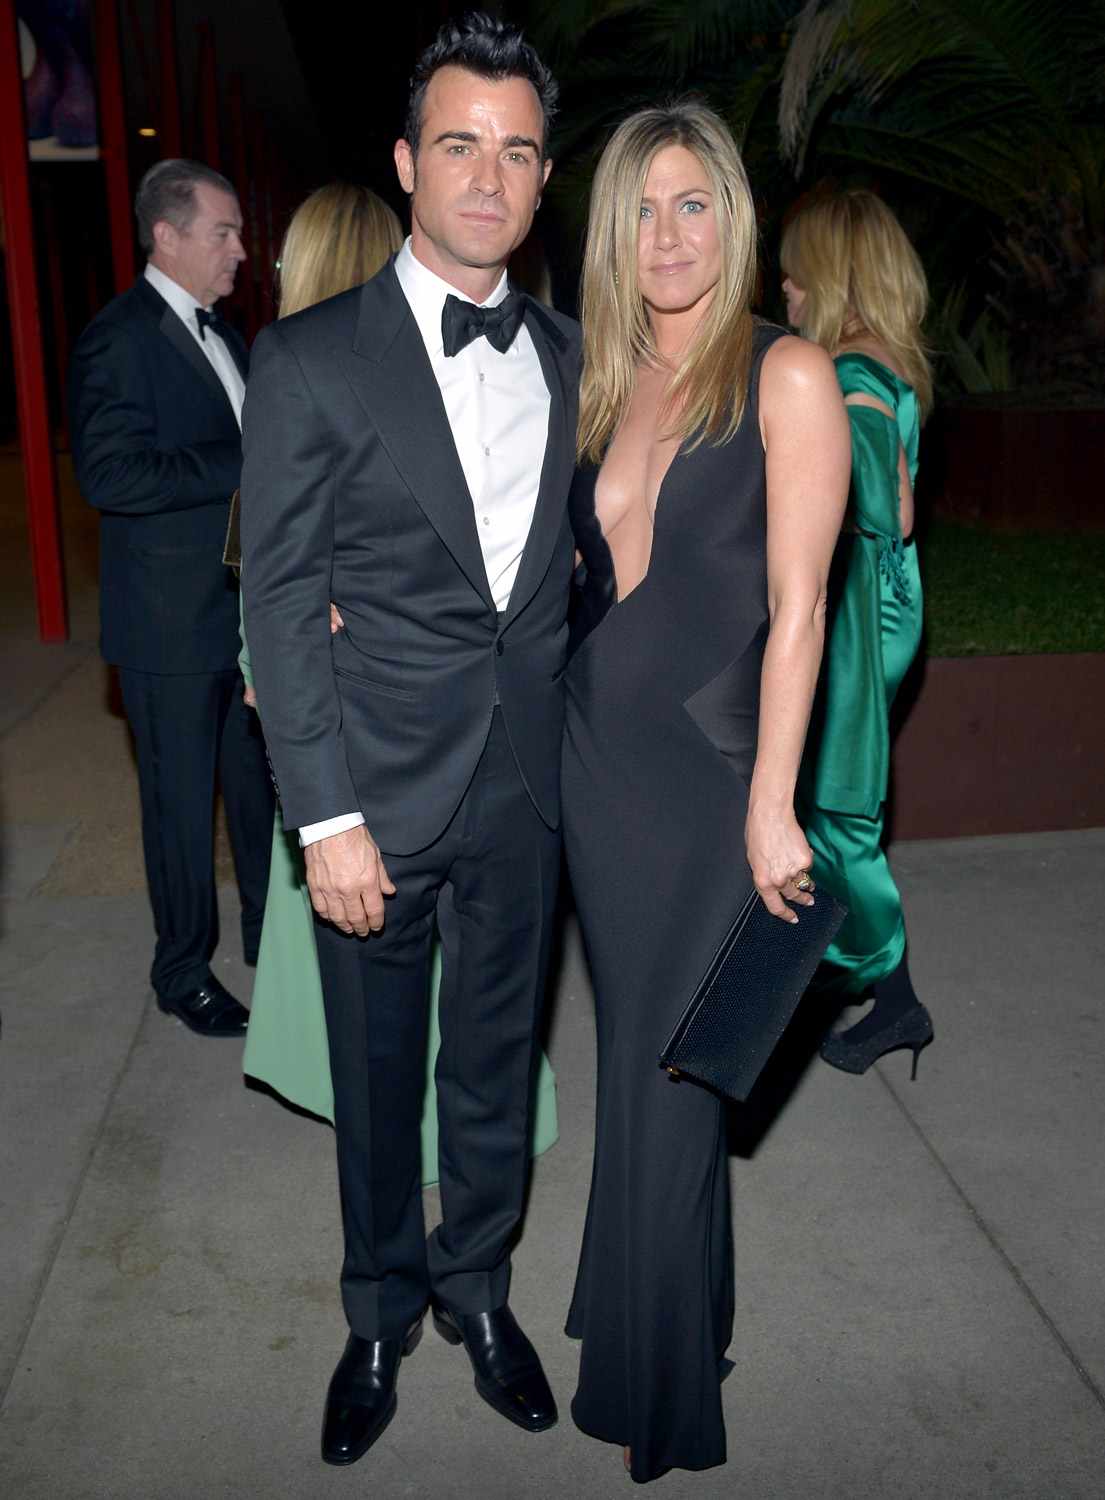 Hot or Not: Jennifer Aniston & Justin Theroux in Tom Ford?